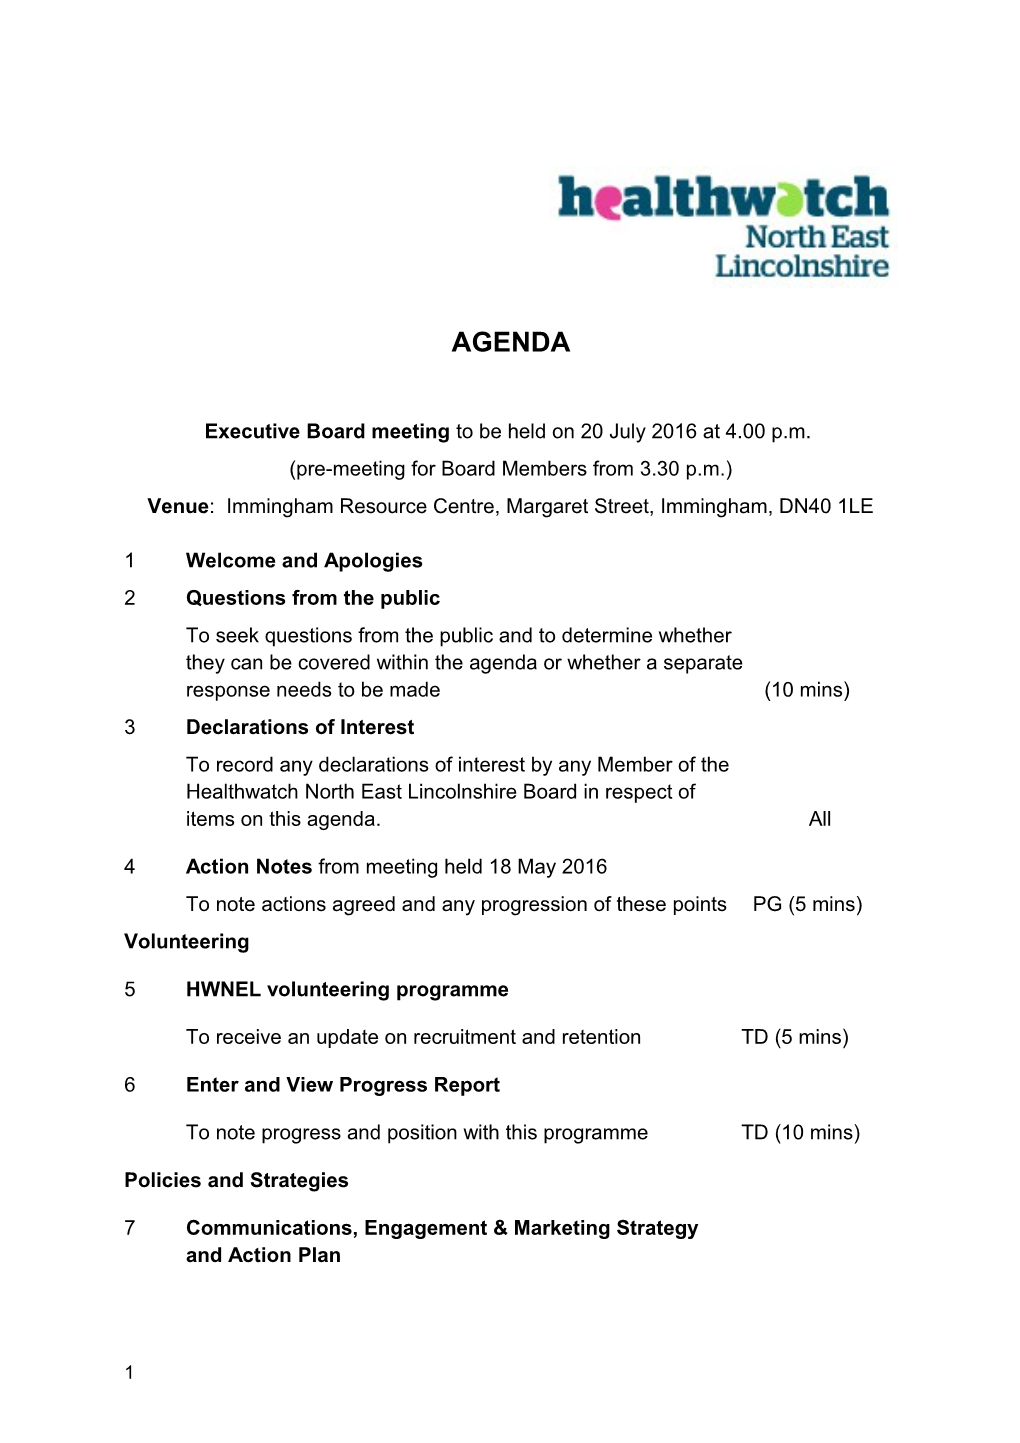 Pre-Meeting for Board Members from 3.30 P.M.